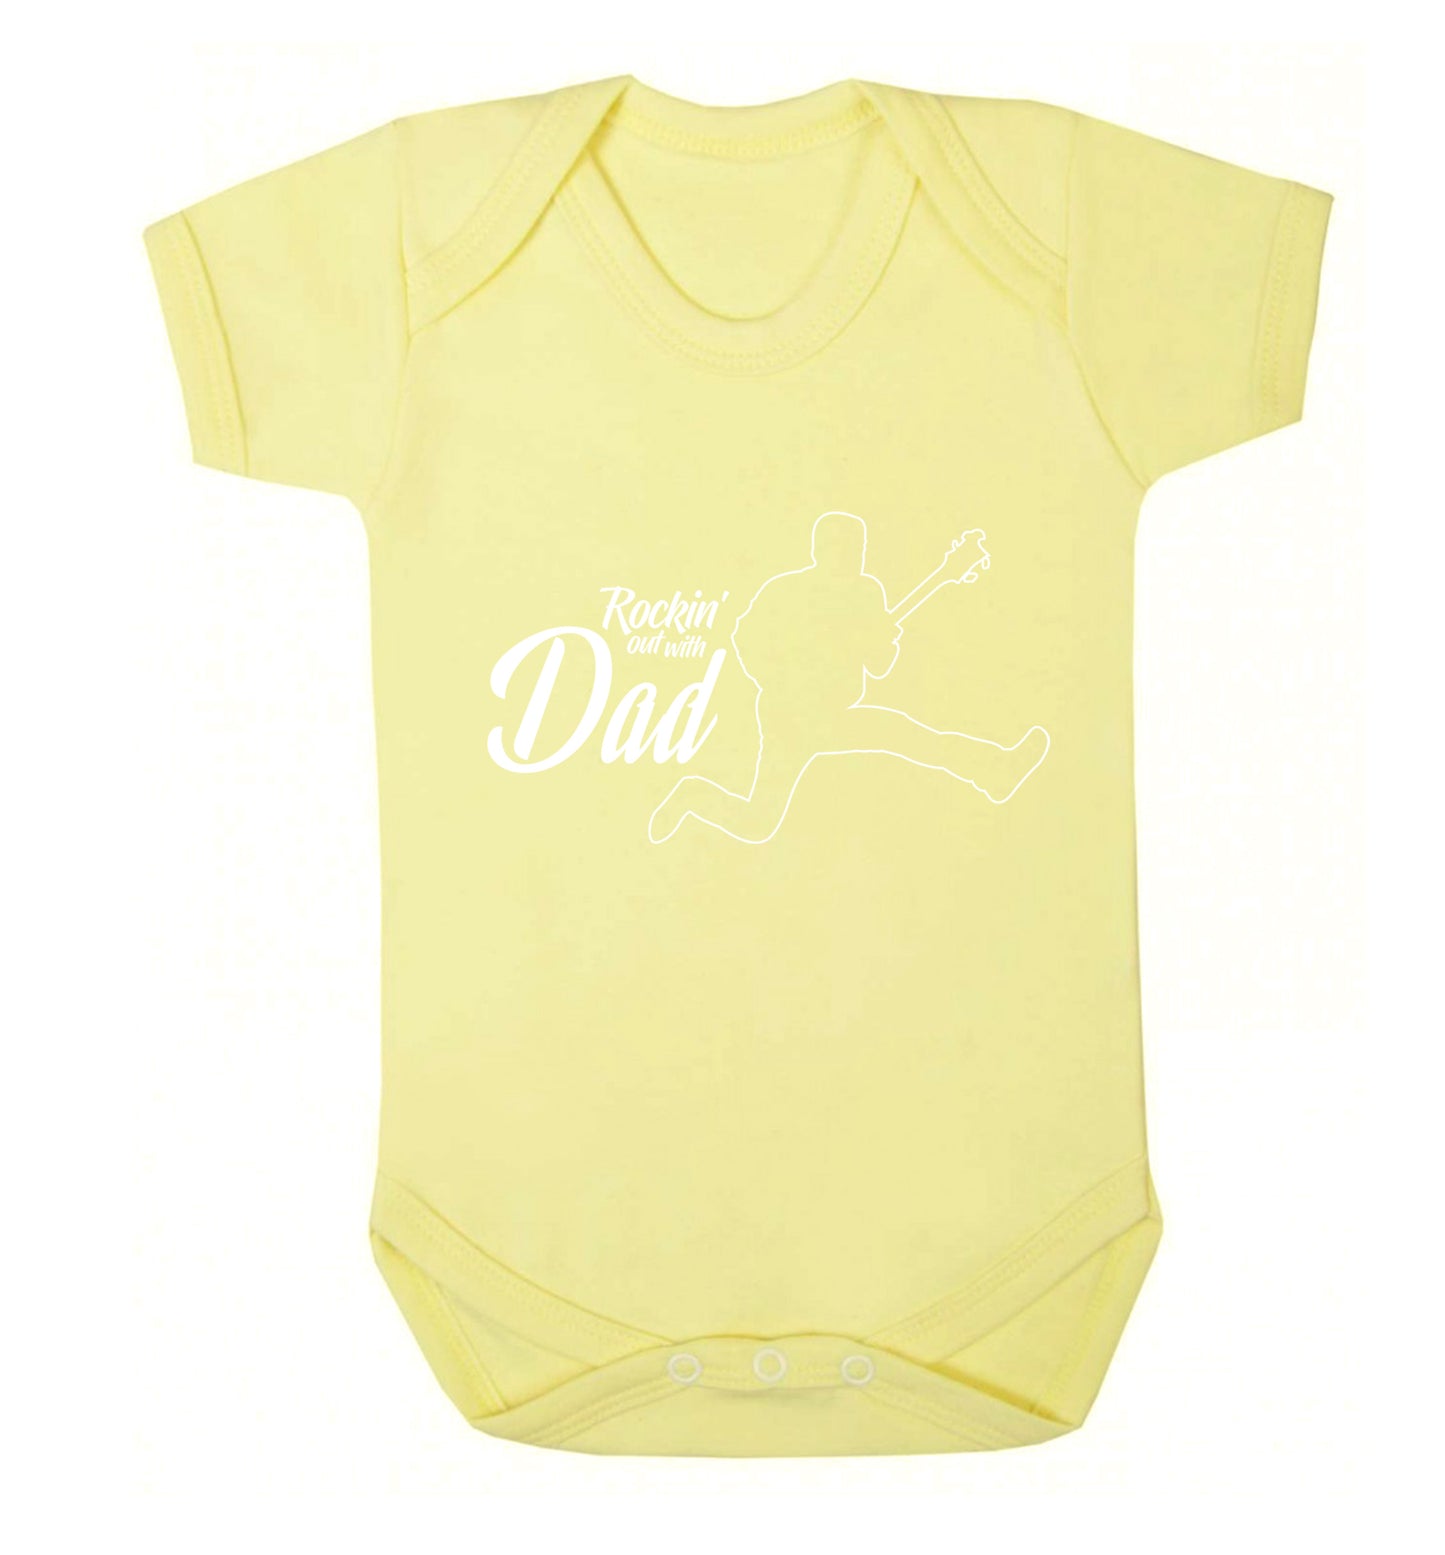 Rockin out with dad Baby Vest pale yellow 18-24 months